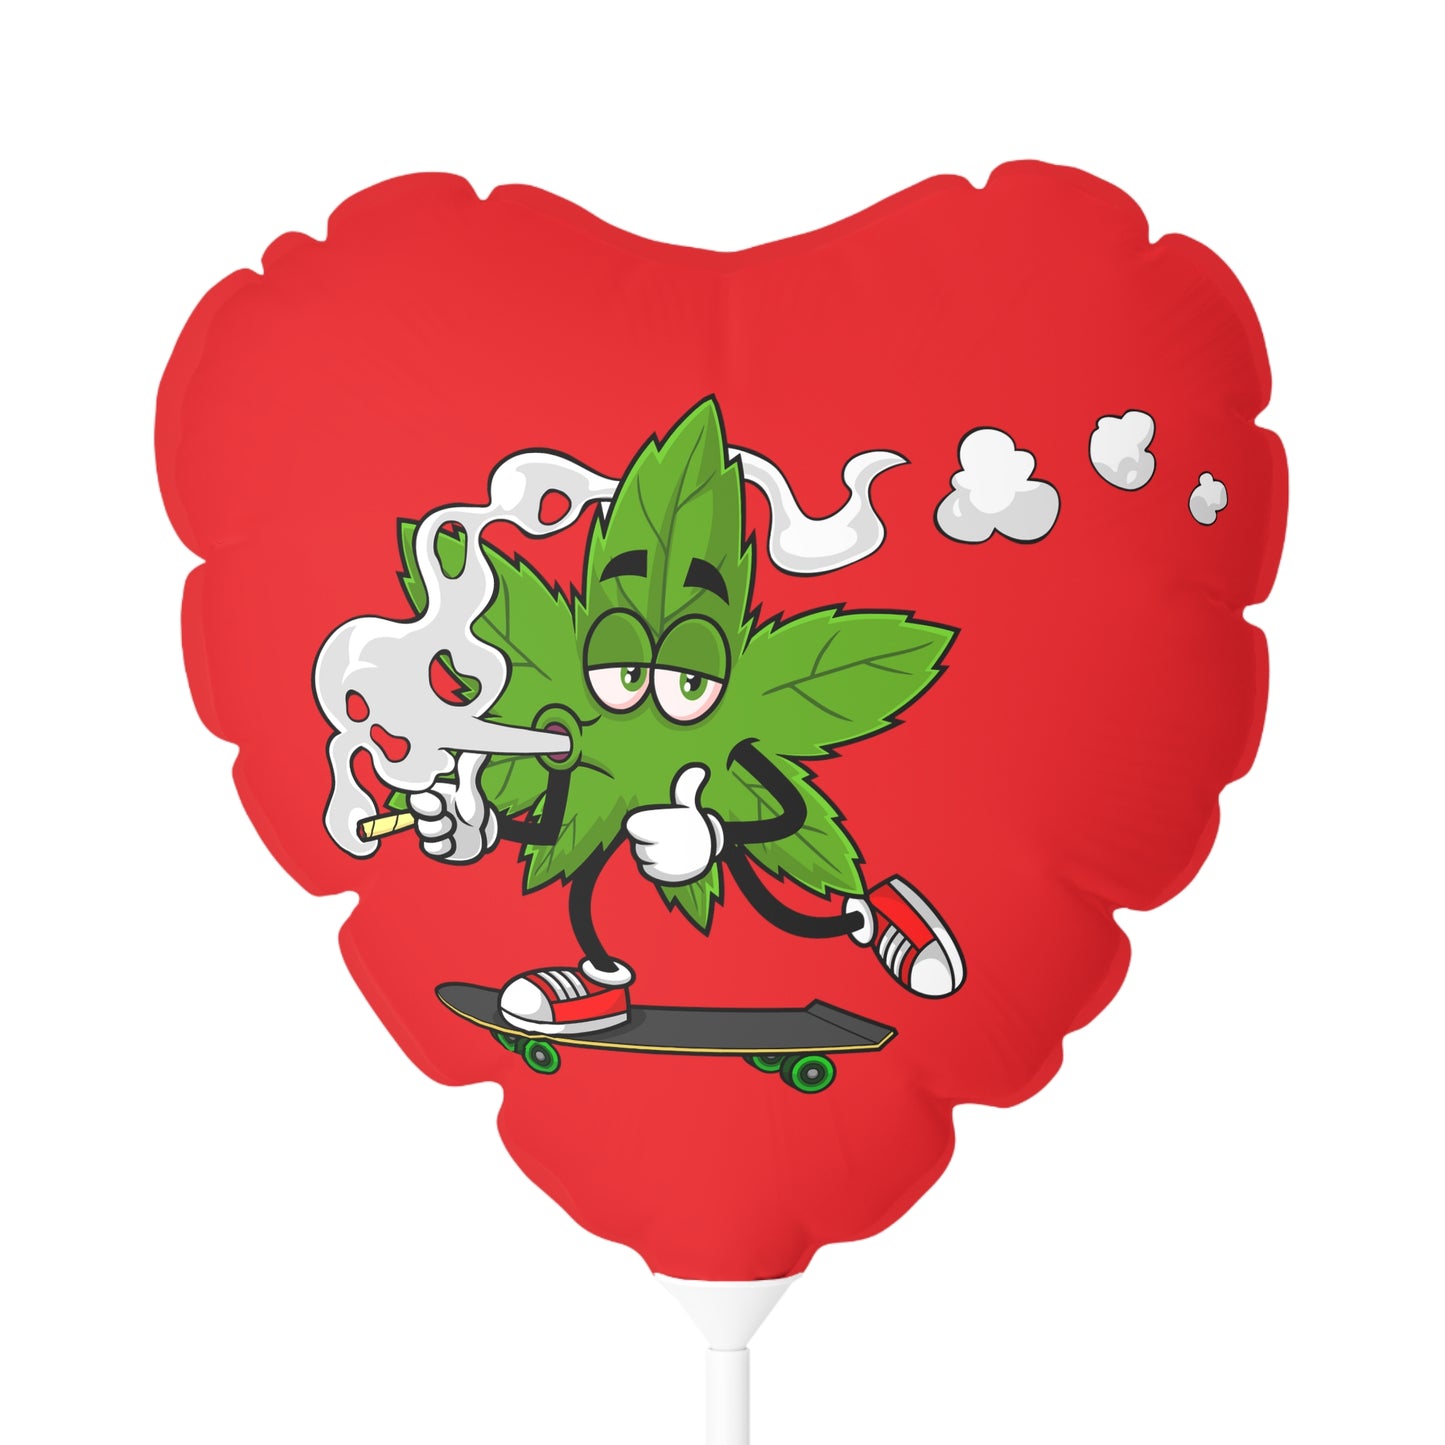 Marijuana Reggae Pot Leaf Man Smoking A Joint With Red Sneakers Style 4, Red Balloon (Round and Heart-shaped), 11"